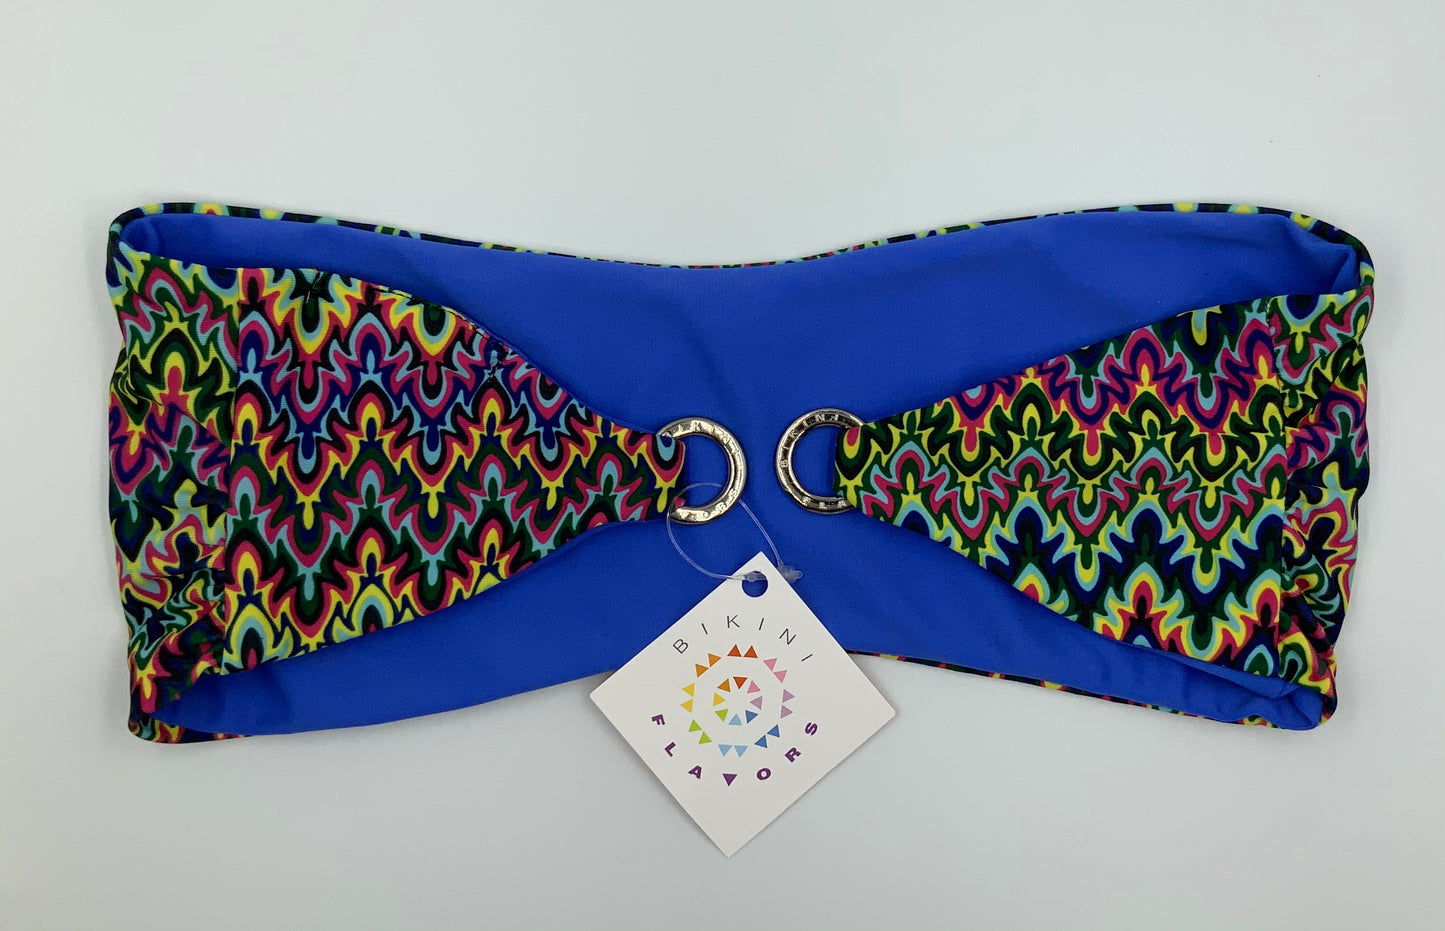 Blue Sapphire Reversible Bandeau Bikini Top by Bikini Flavors.  Periwinkle Blue reverses to colorful print,  Mix and match with Berry Breeze.  American Made. 